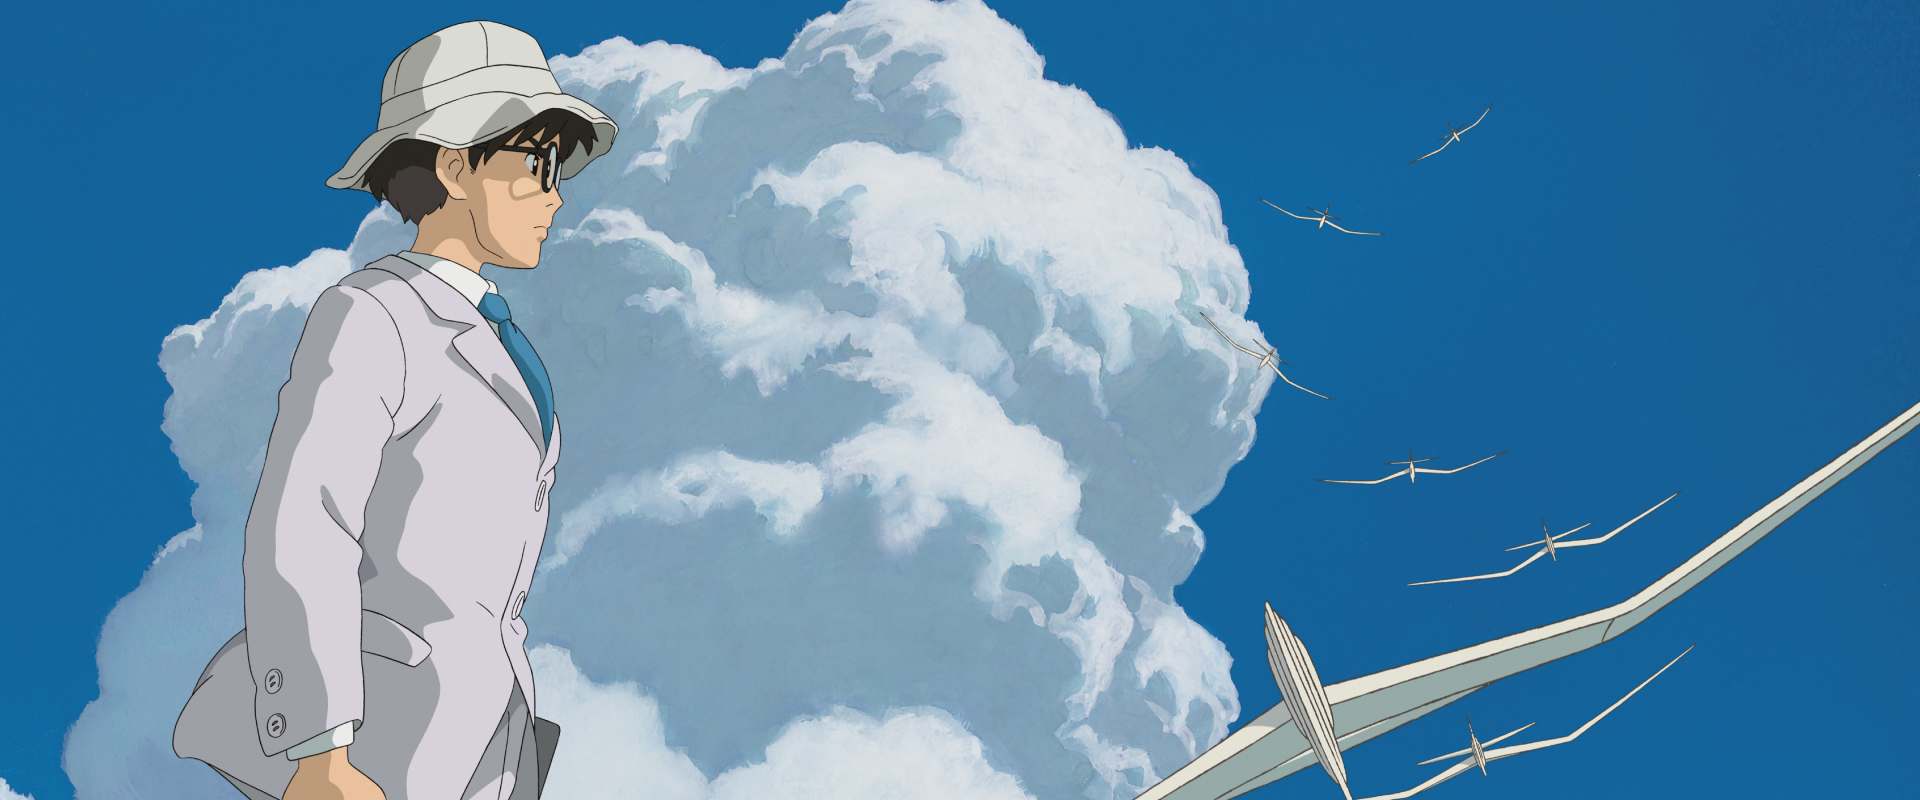 The Wind Rises background 2